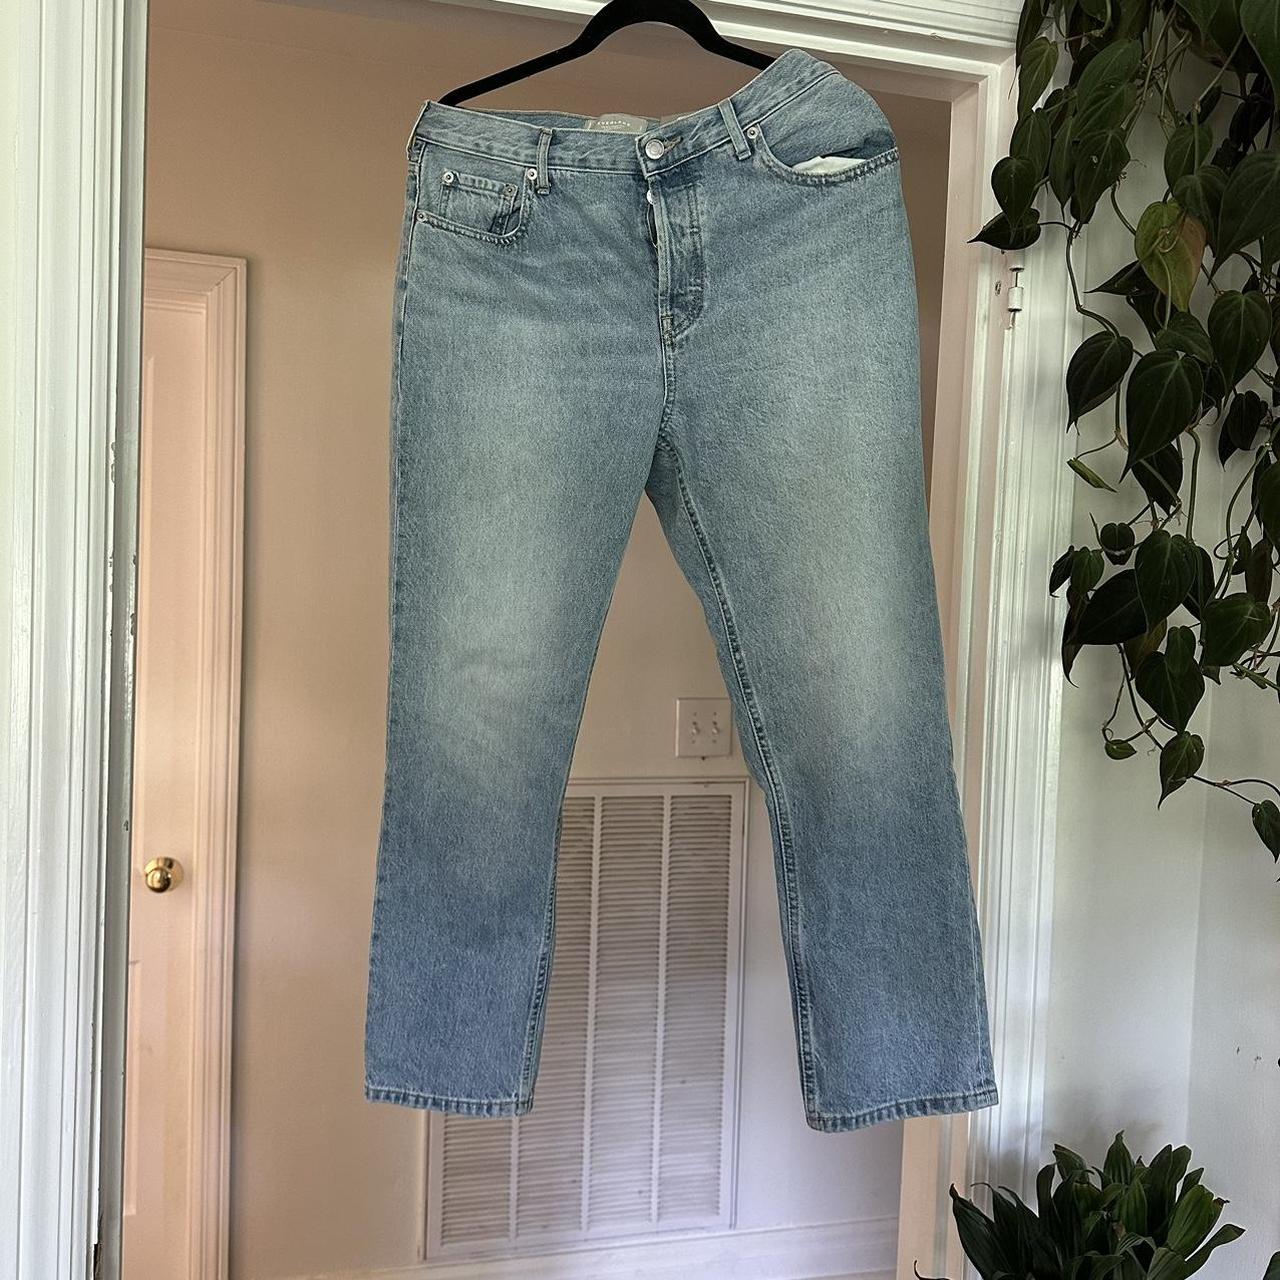 Everlane The 90’s Cheeky Jean NWT only worn for try... - Depop